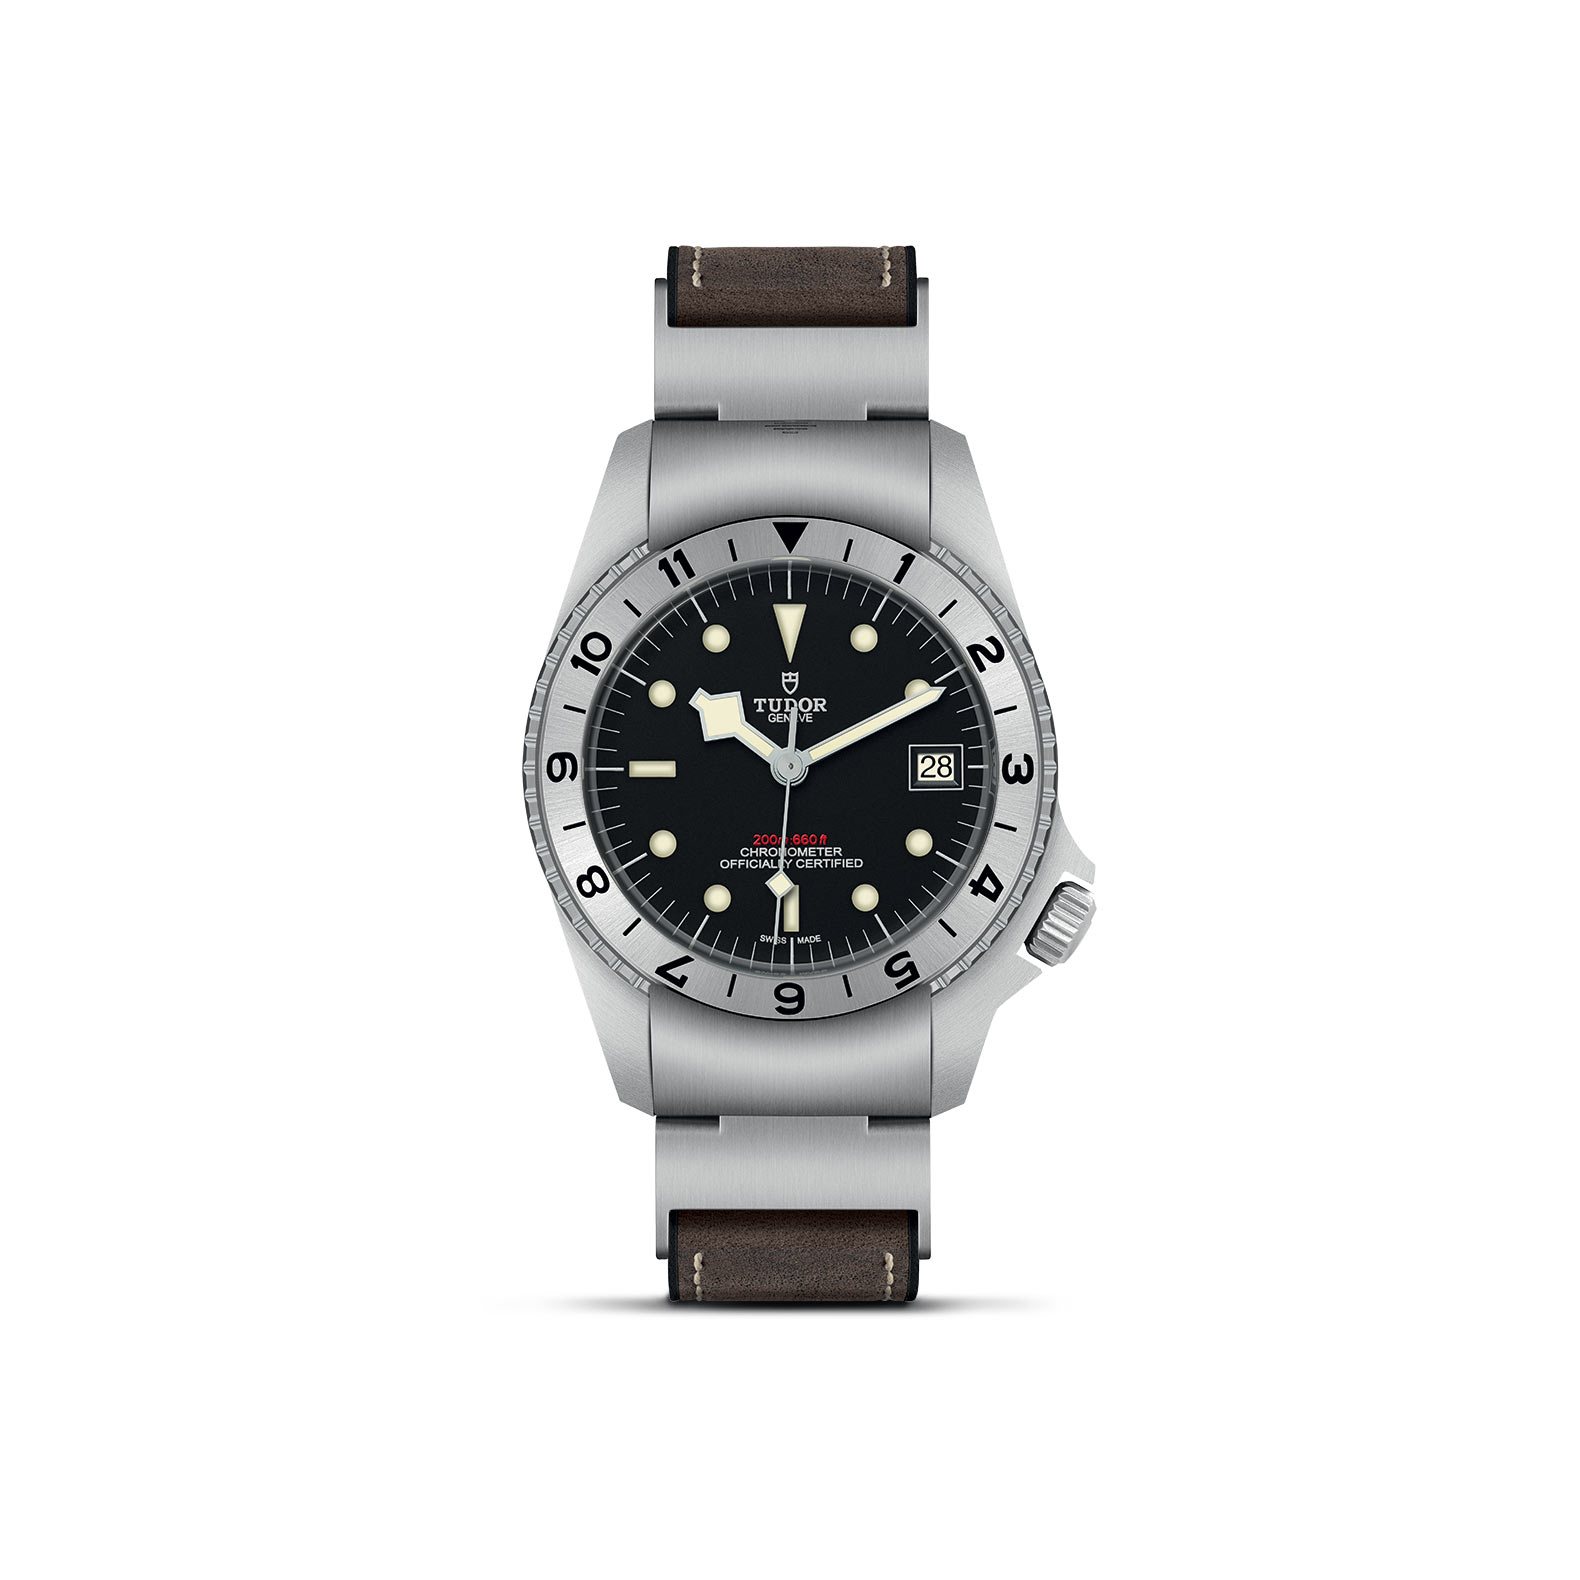 TUDOR BLACK BAY P01 standing upright, highlighting its classic design against a white background.